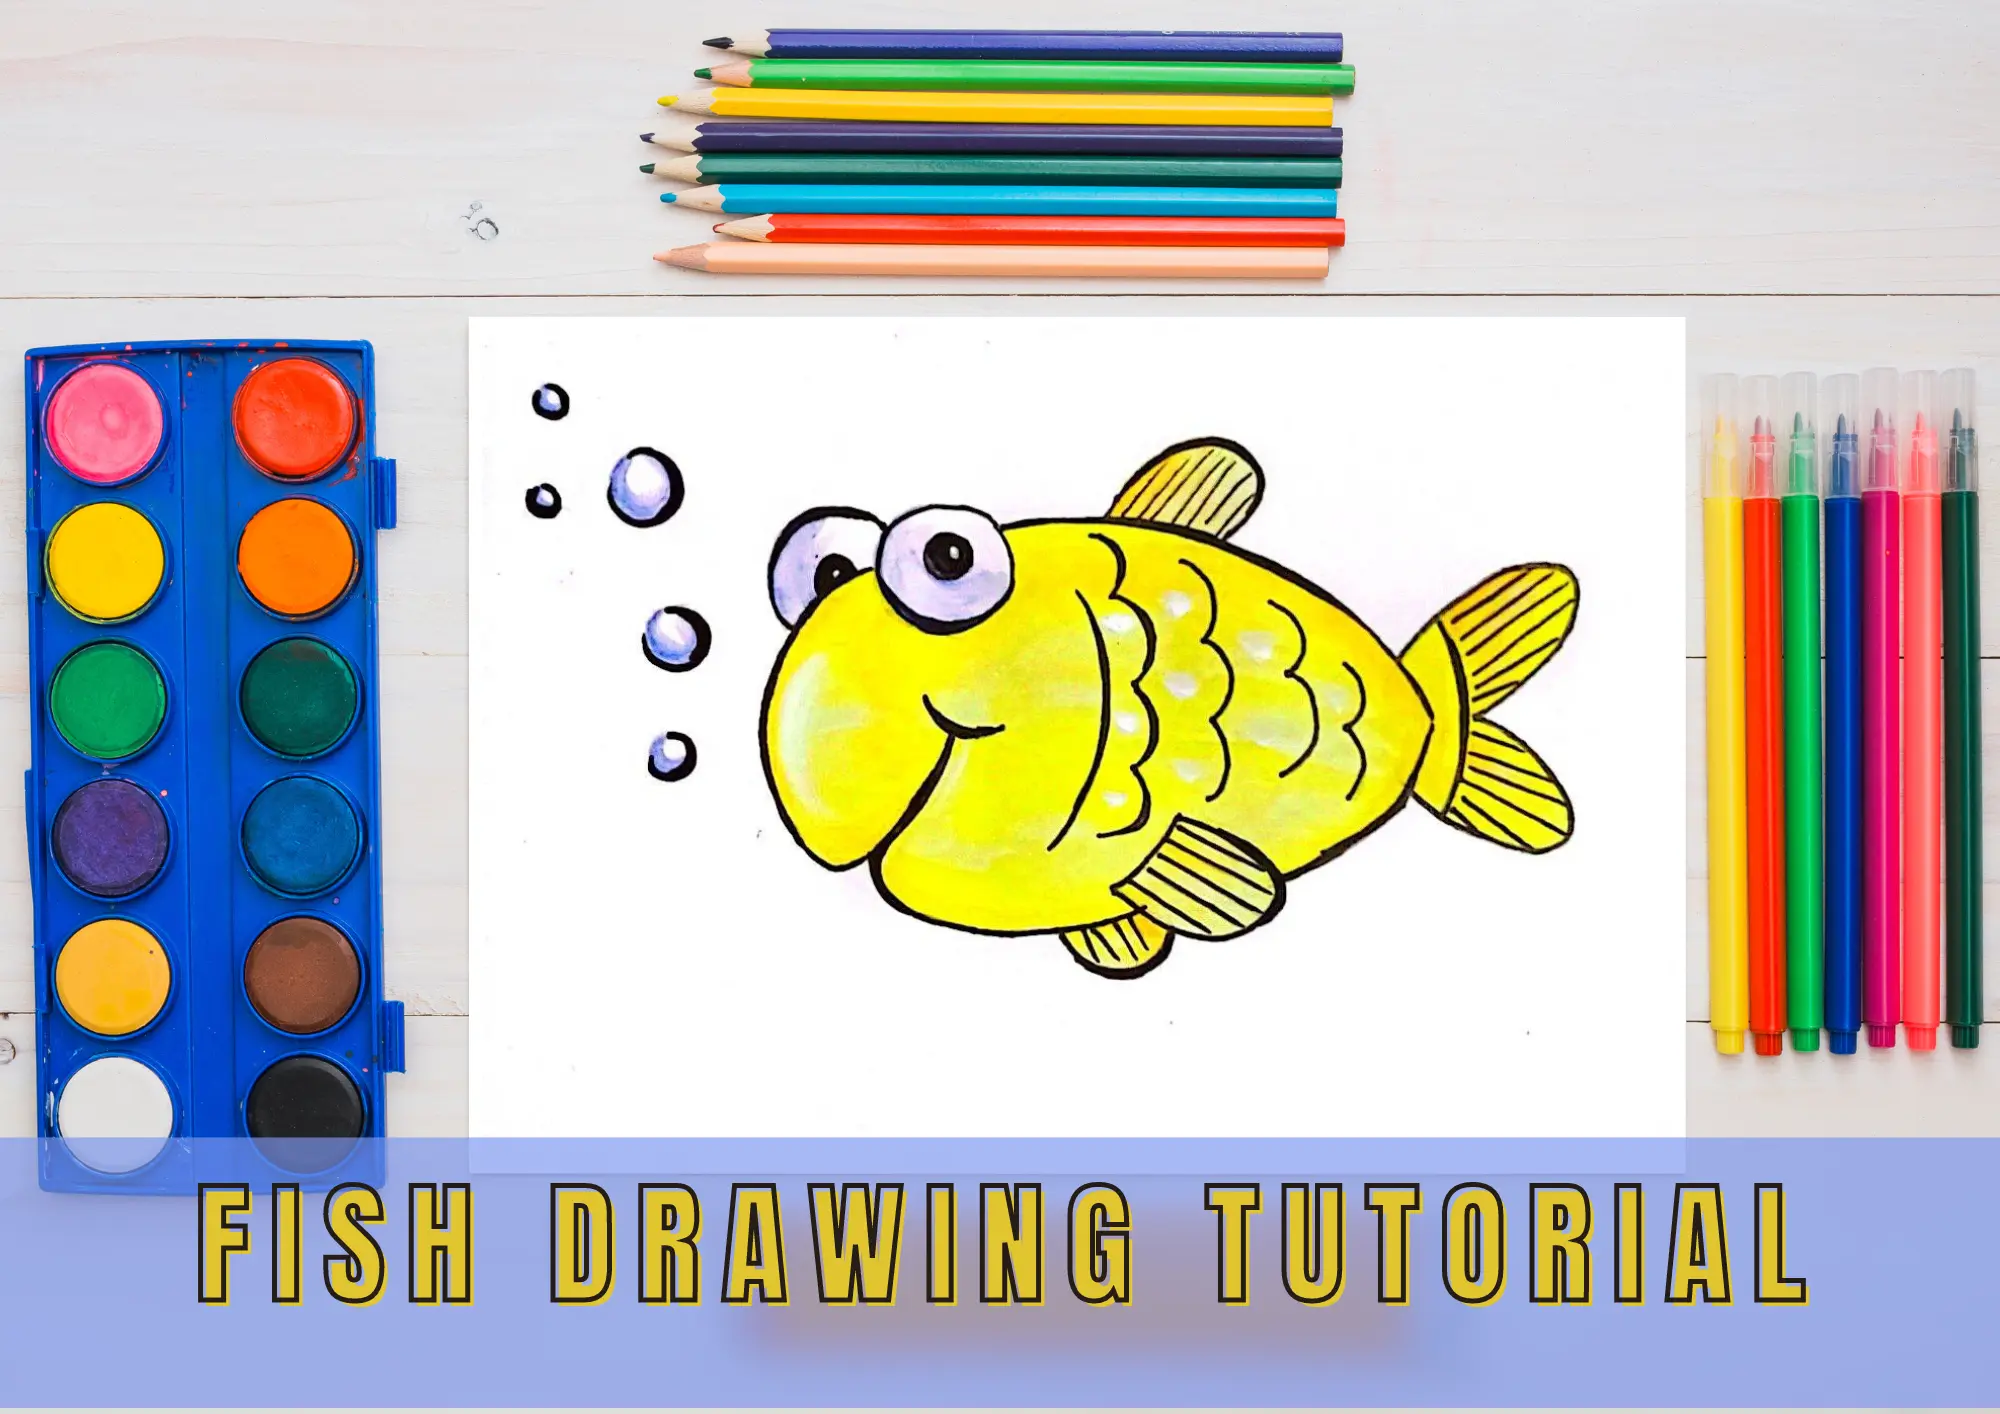 How to Draw a Fish - Instructables